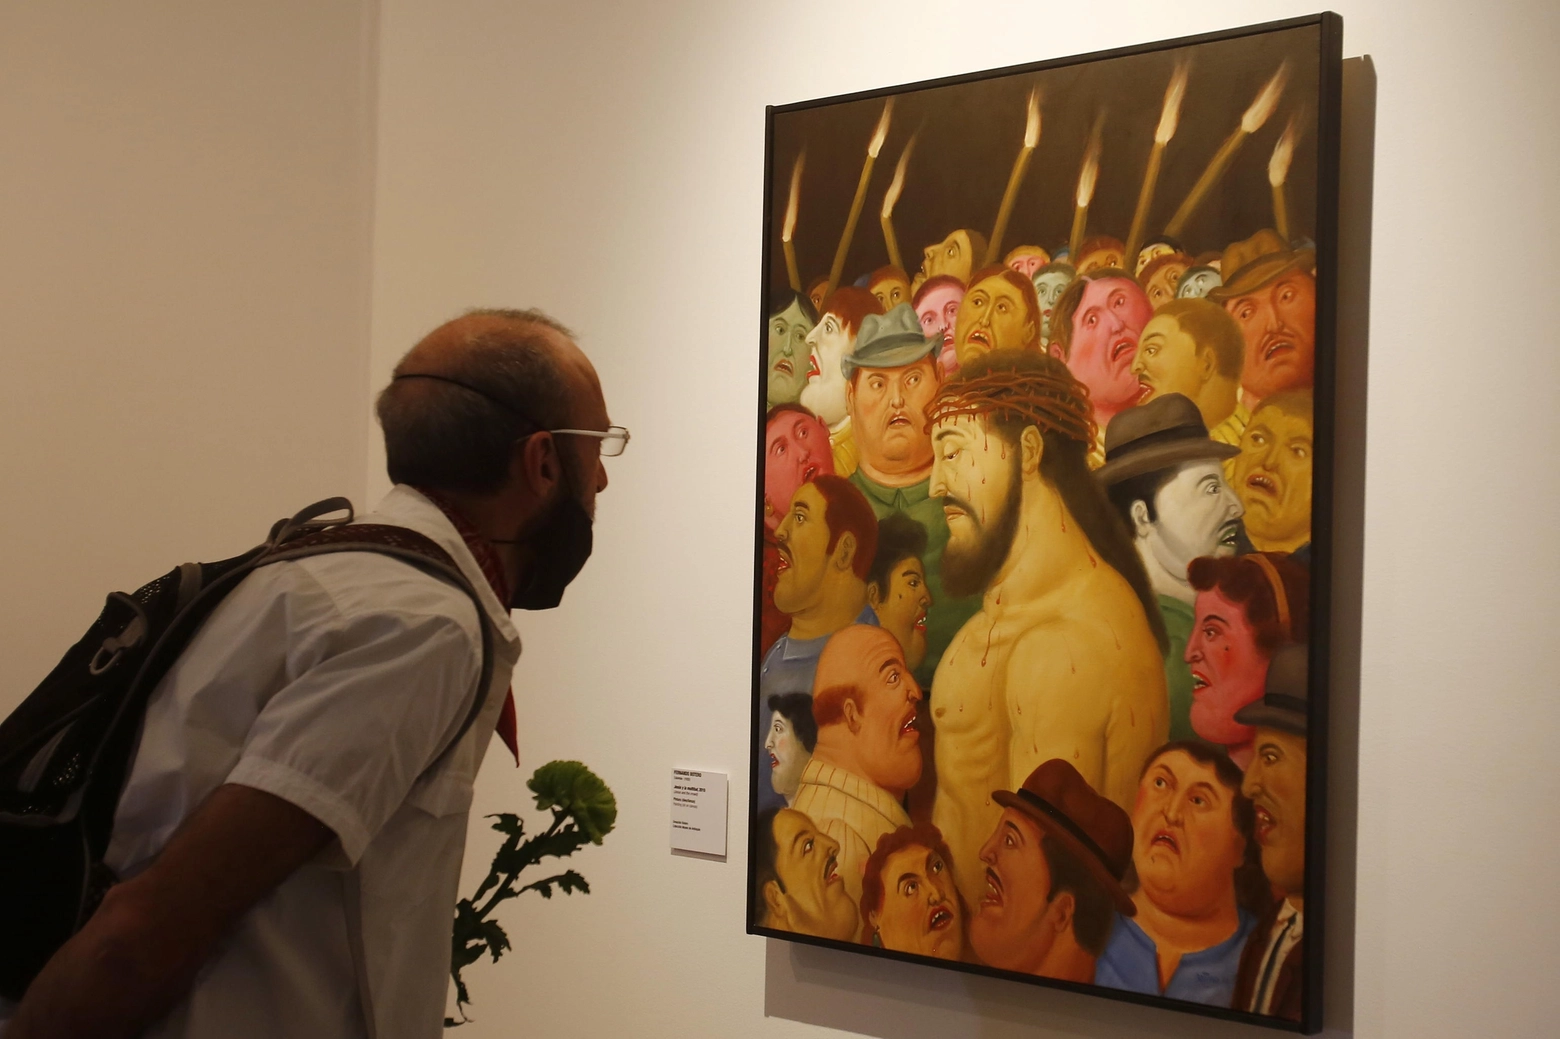 epa09897816 Visitors appreciate some of the works by Colombian artist Fernando Botero during a commemorative act for the celebration of his 90 years, at the Museum of Antioquia in Medellin, Colombia, 19 April 2022. Medellin celebrates with art, flowers and music the 90th birthday of Fernando Botero, one of the most important artists in the country's history.  EPA/Luis Eduardo Noriega A.